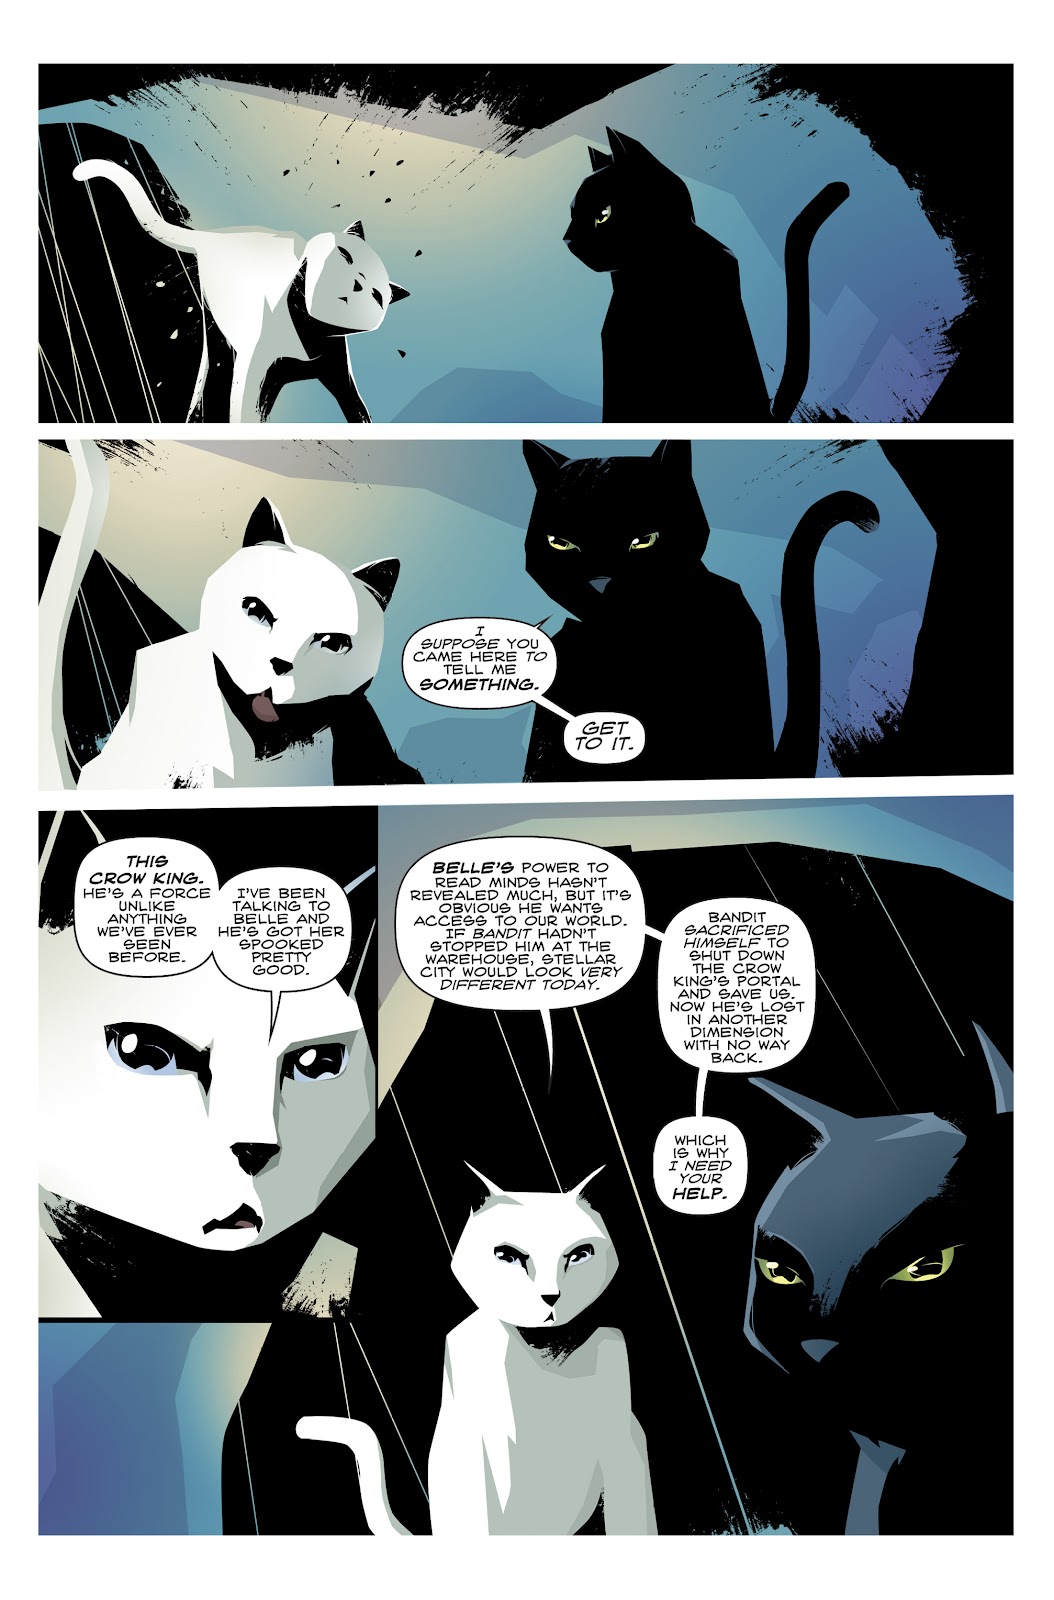 Hero Cats: Midnight Over Stellar City Vol. 2 issue 1 - Page 7